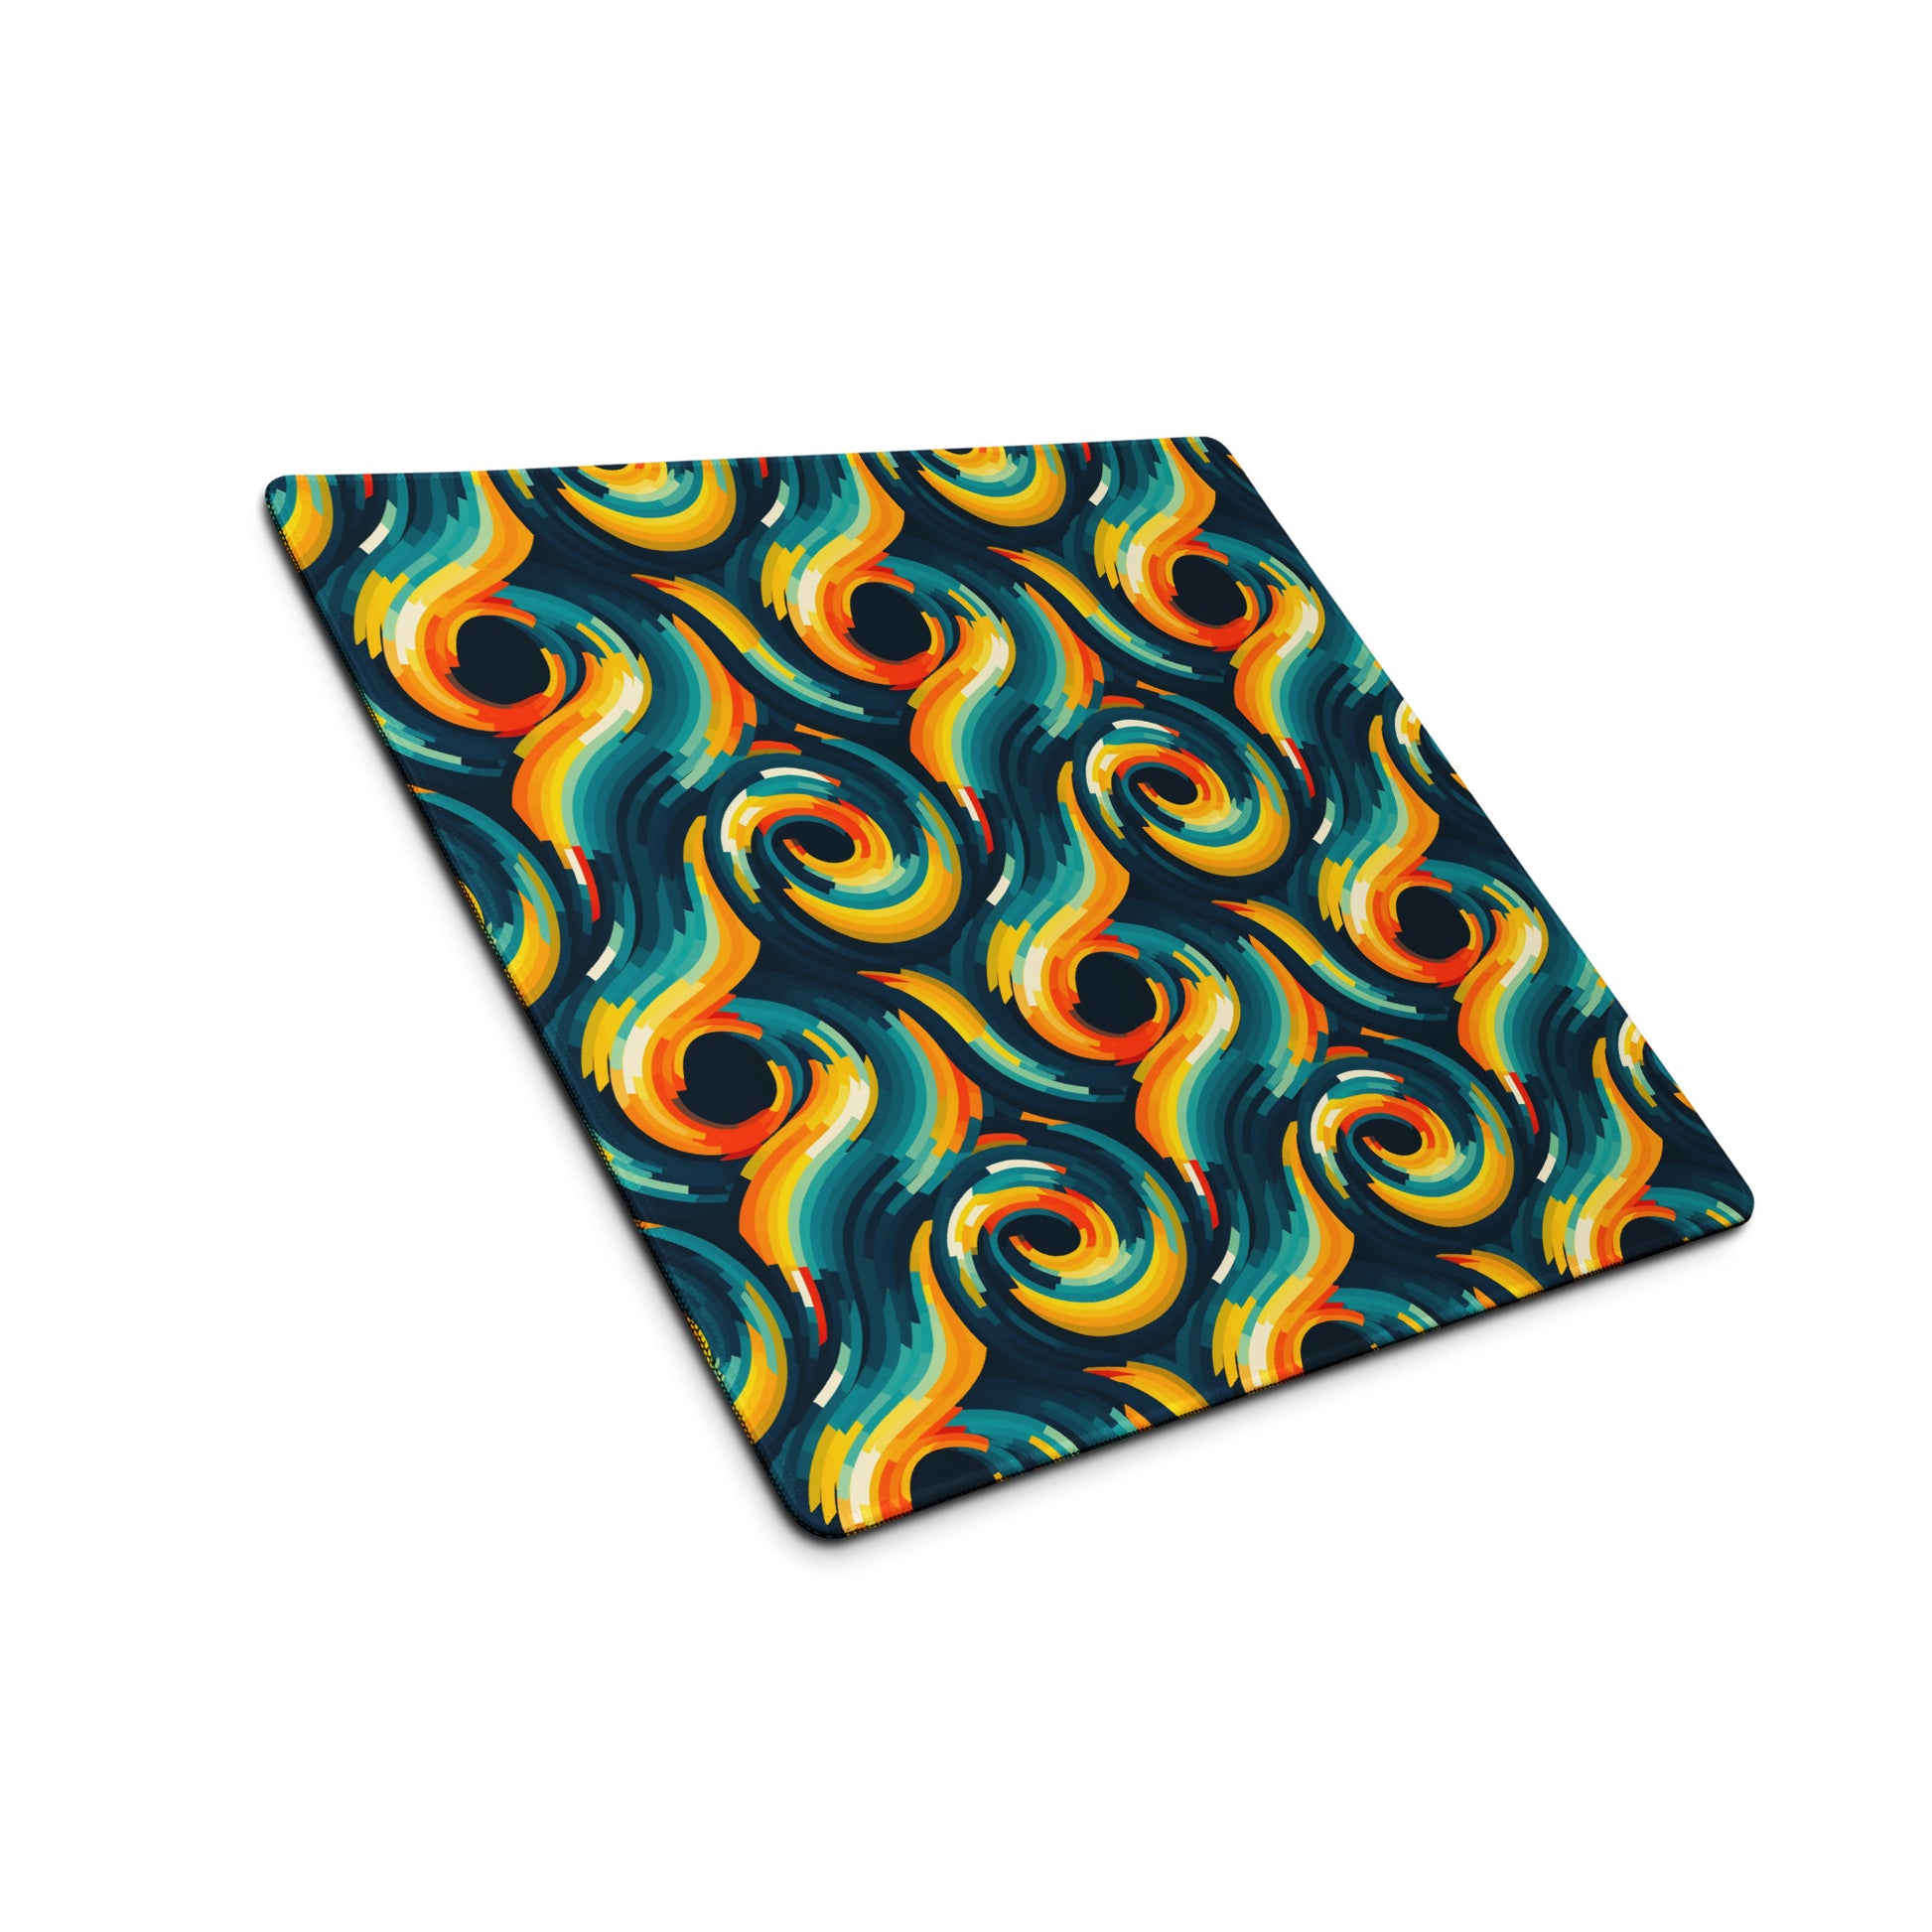  A 18" x 16" desk pad with swirls all over it shown at an angle. Yellow and Blue in color.